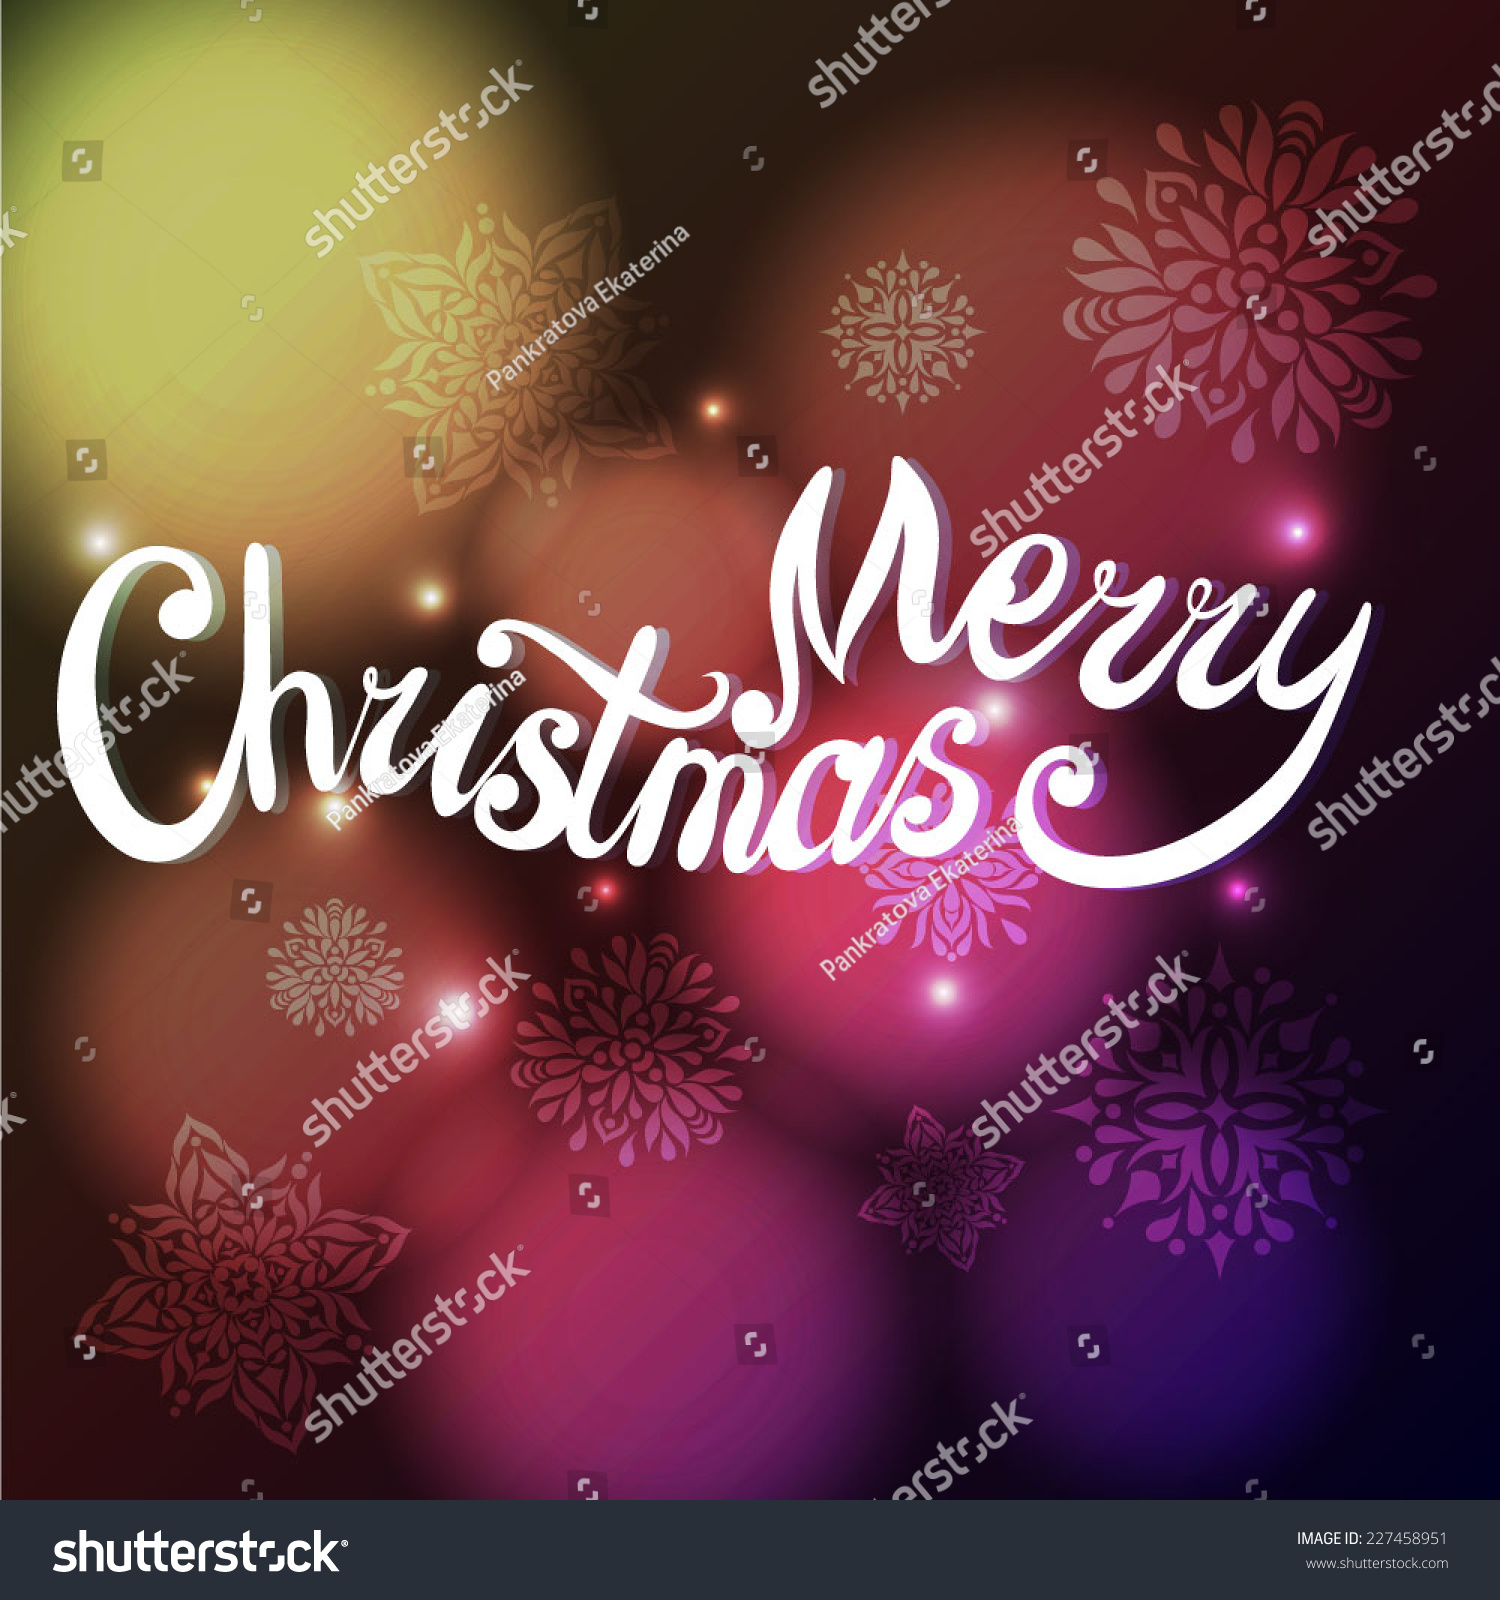 Card "Merry Christmas" with bokeh background Creative lettering Vector illustration